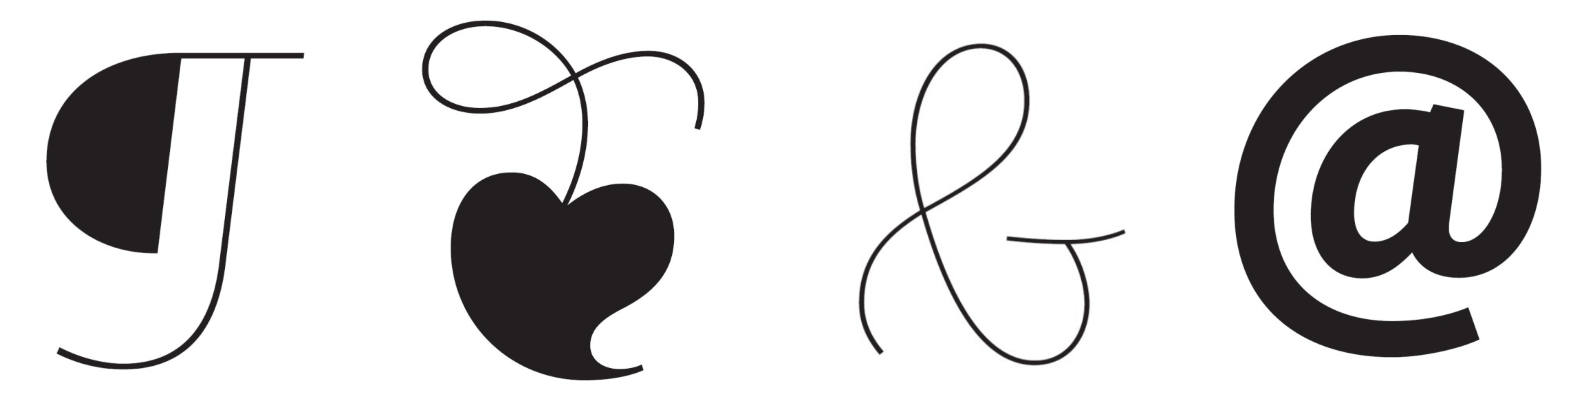 A pilcrow, hedera, ampersand and @-symbol from Jim Ford's Quire Sans. (Quire Sans™ is a trademark of Monotype Imaging Inc. and may be registered in certain other jurisdictions.)